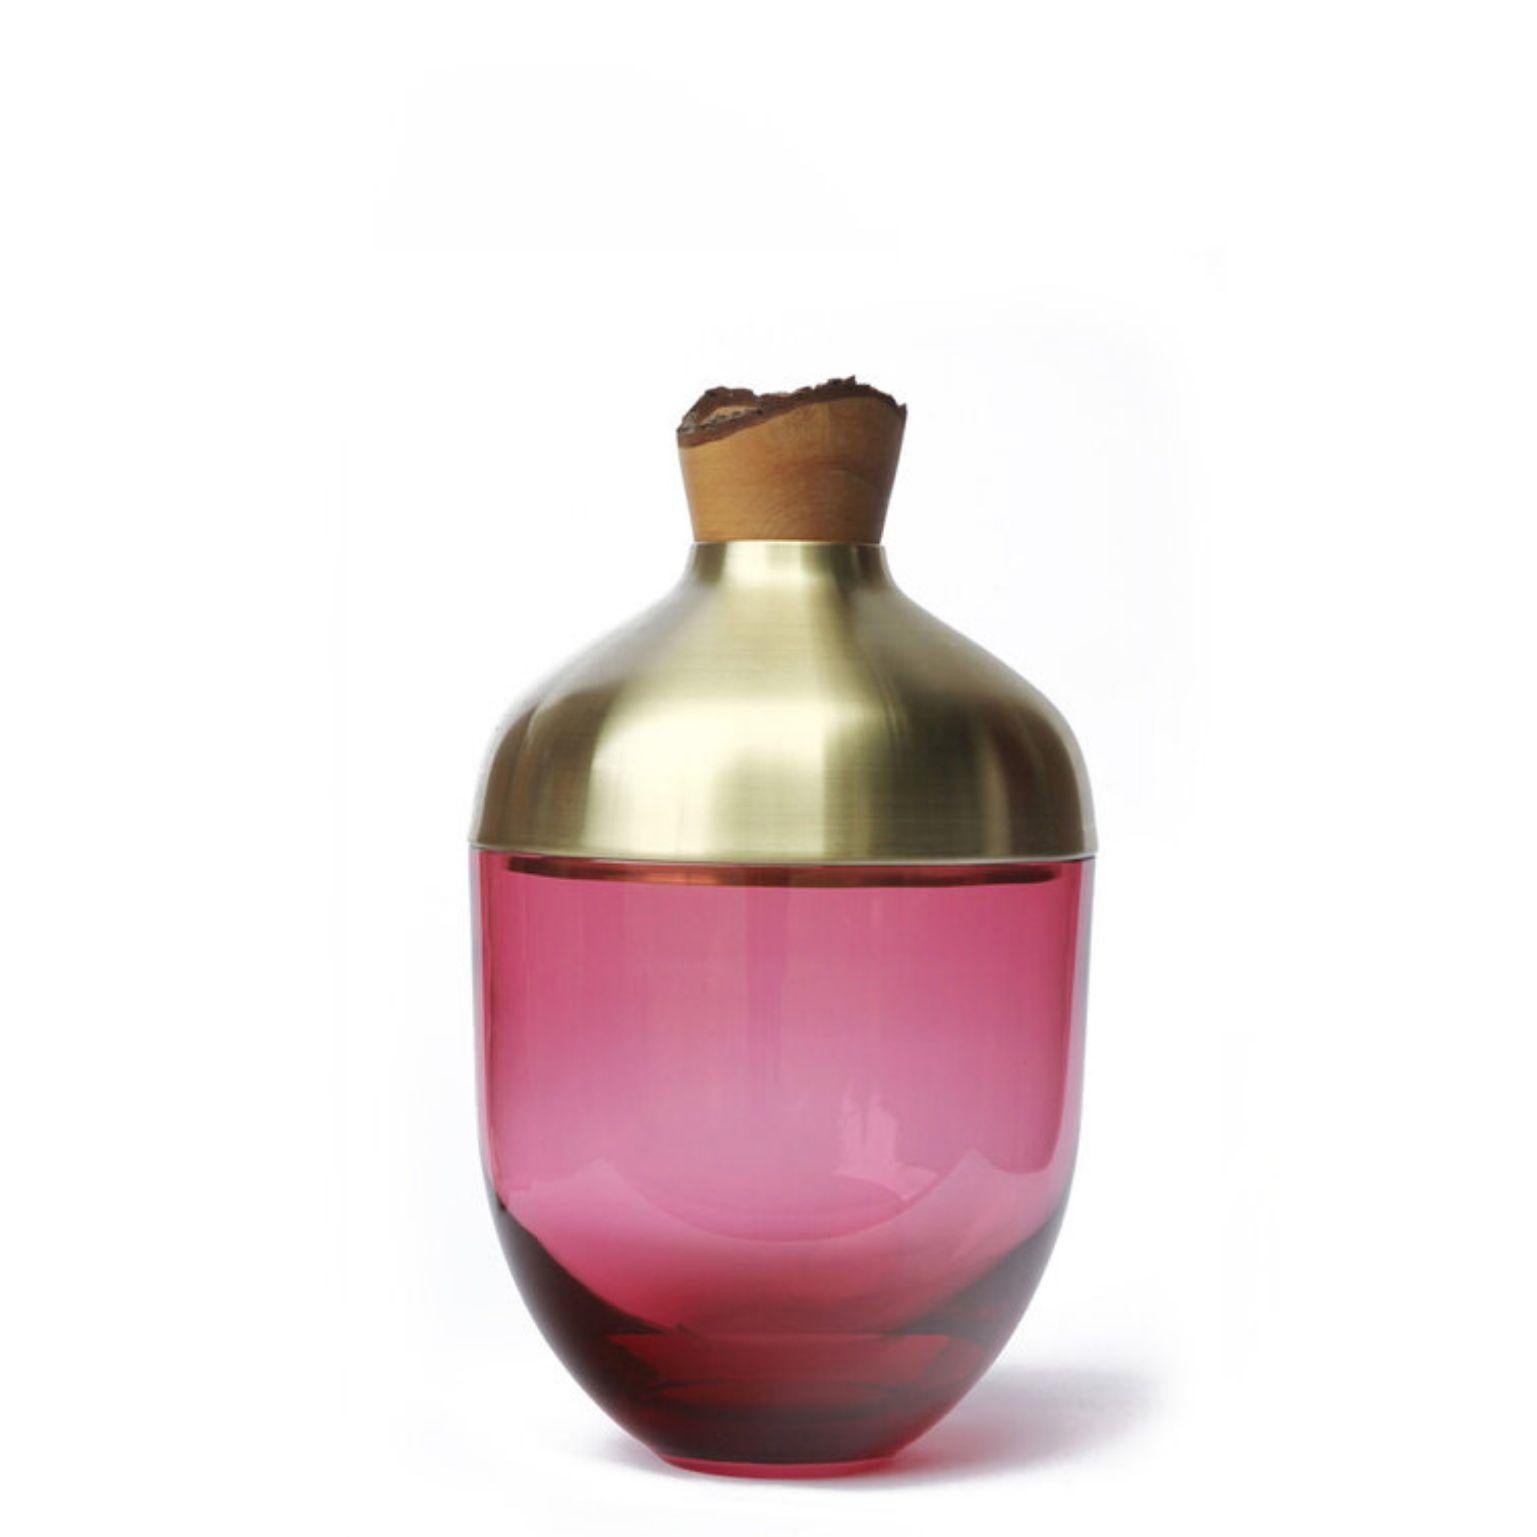 Sculpted blown glass and brass vase - Pia Wüstenberg.
Dimensions: height 55 x diameter 30 cm.
Both rough and refined, this assortment plays with the multiple metamorphosis glass grants as a material. The glass is first hand blown, and then cold